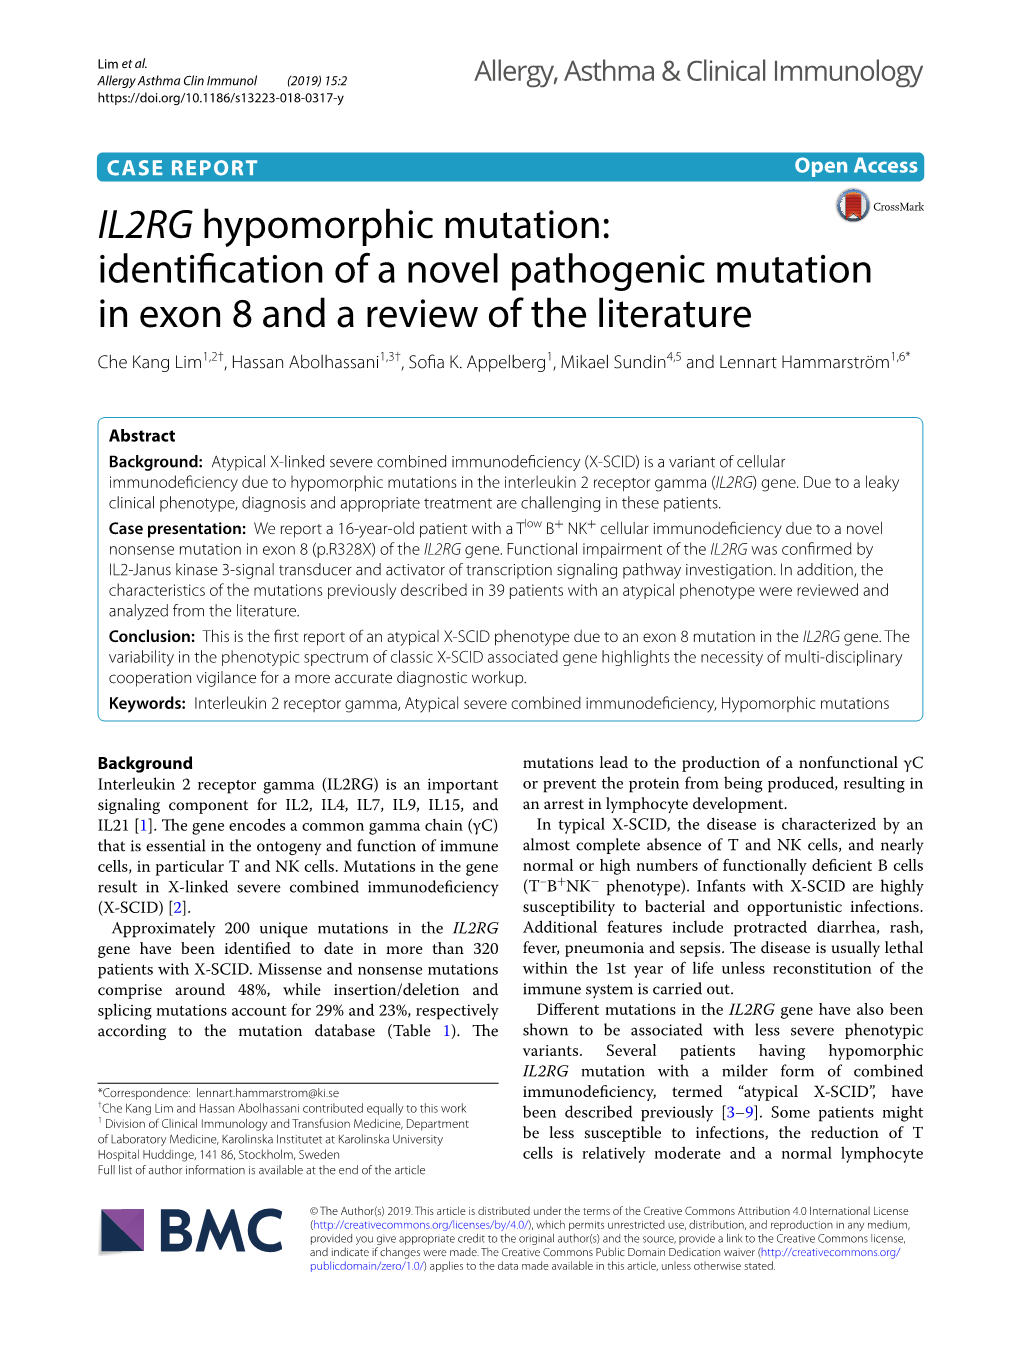 IL2RG Hypomorphic Mutation: Identifcation of a Novel Pathogenic Mutation in Exon 8 and a Review of the Literature Che Kang Lim1,2†, Hassan Abolhassani1,3†, Sofa K